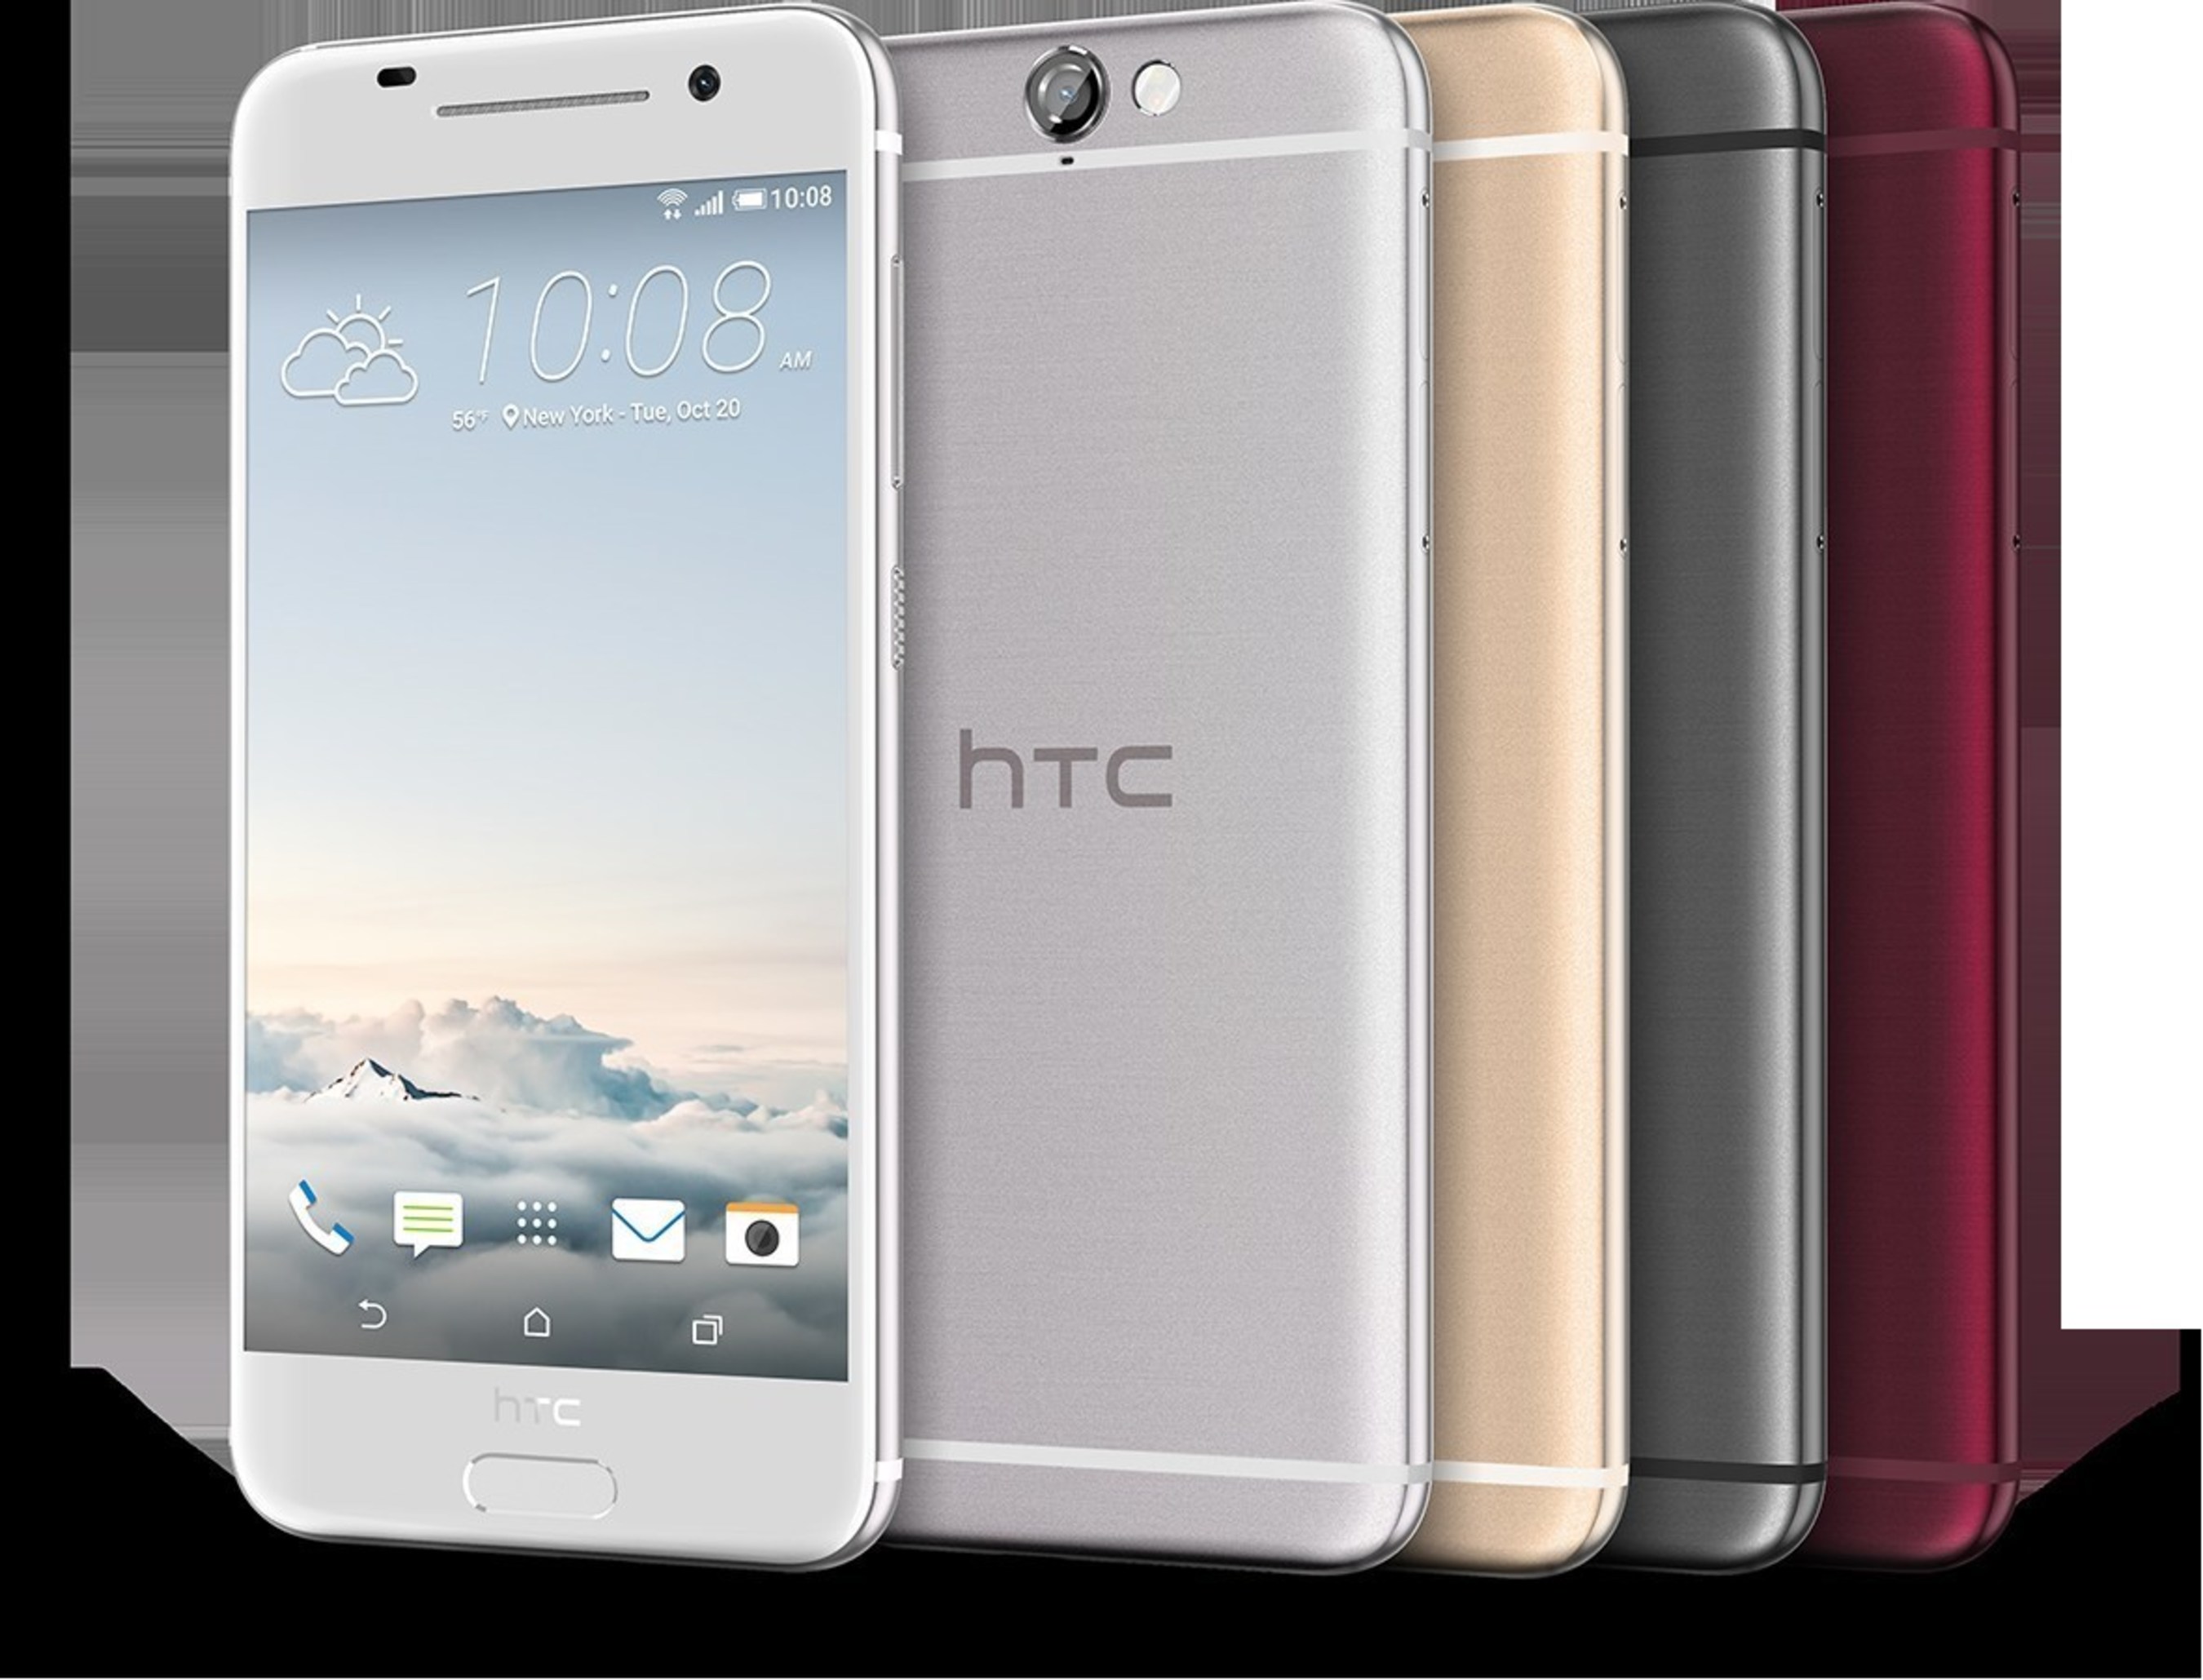 HTC delivers a bold new choice for people who want stunning design without compromising on style, performance or personalization: the HTC One A9